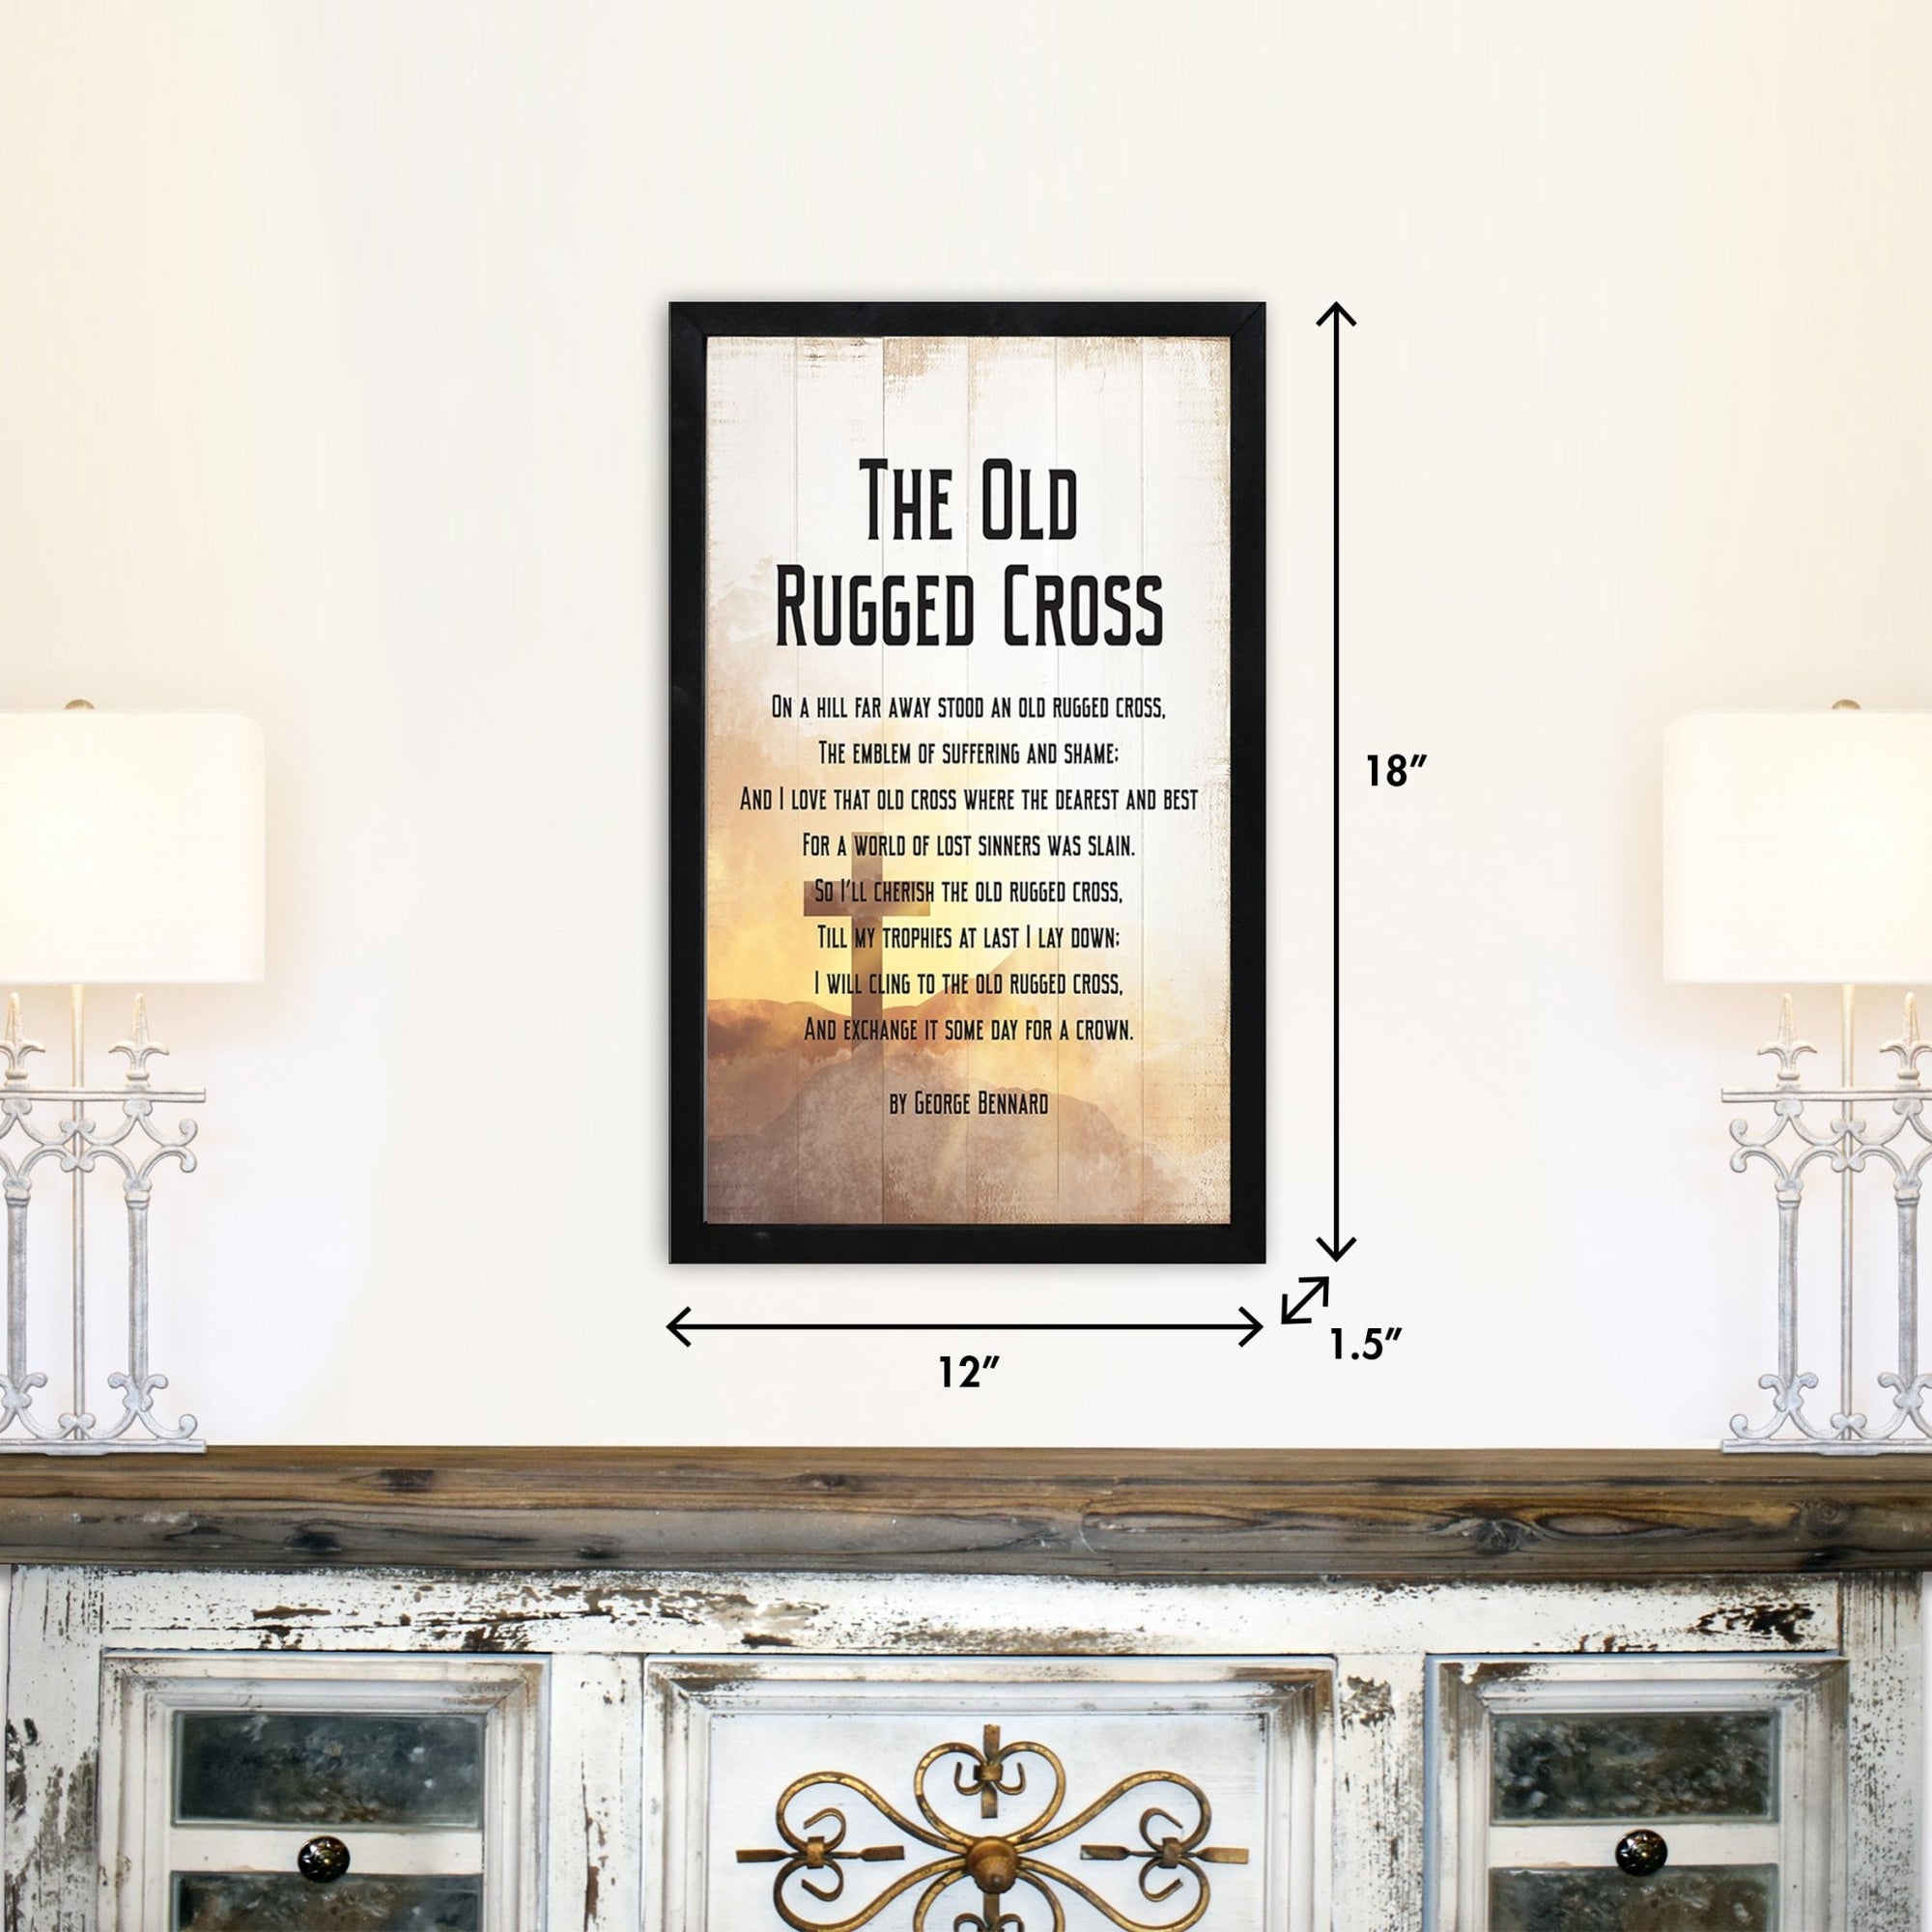 Modern-Inspired Framed Shadow Box For Home & Gift Ideas - The Old Rugged Cross - LifeSong Milestones